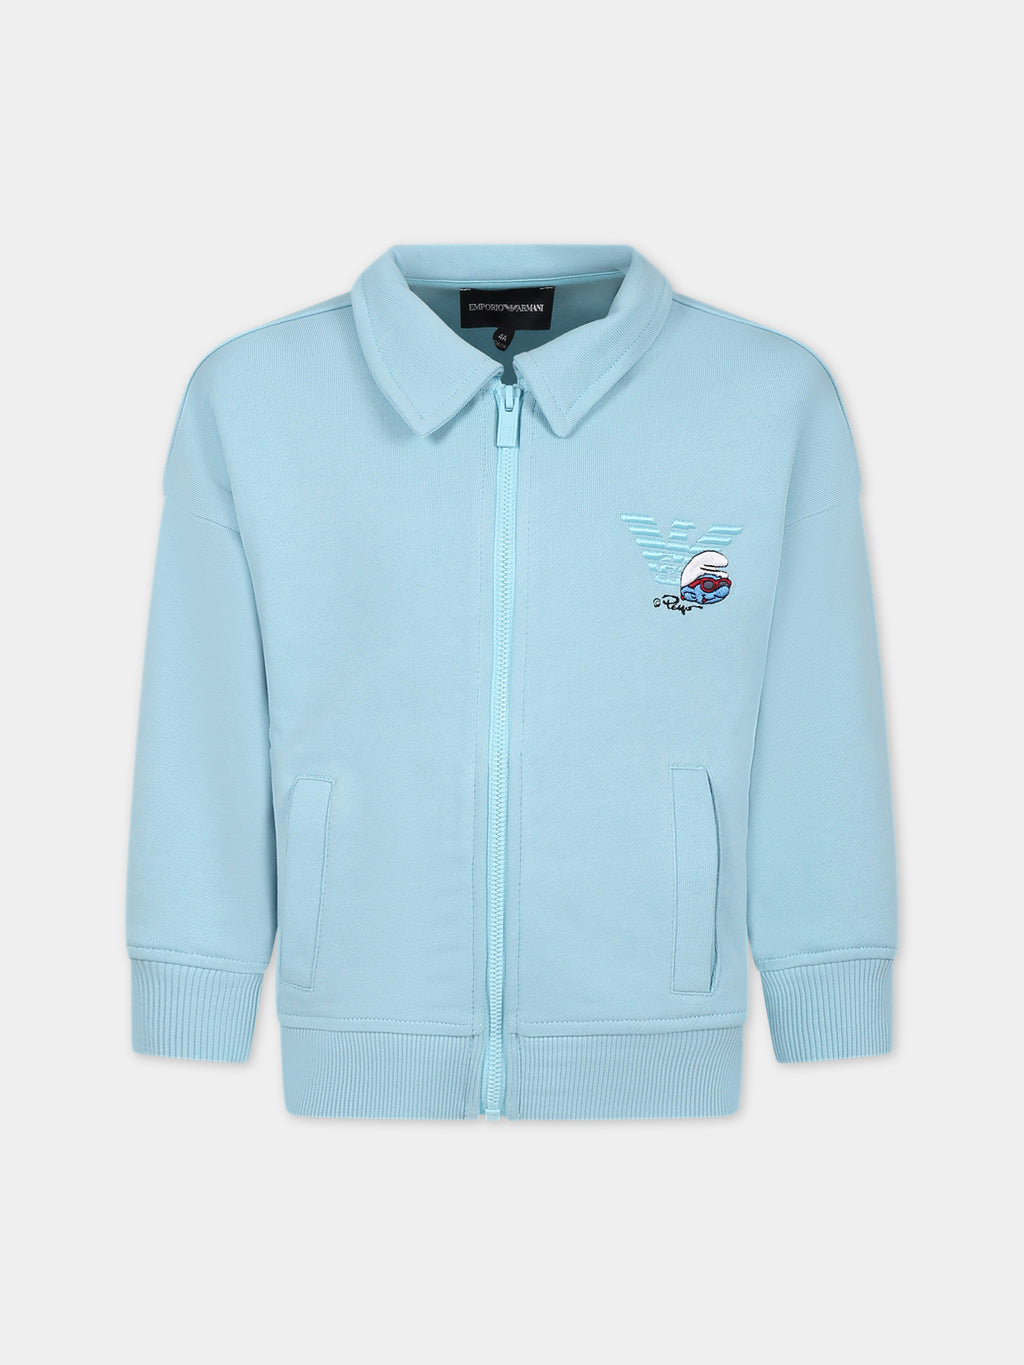 Sky blue sweatshirt for boy with The Smurfs